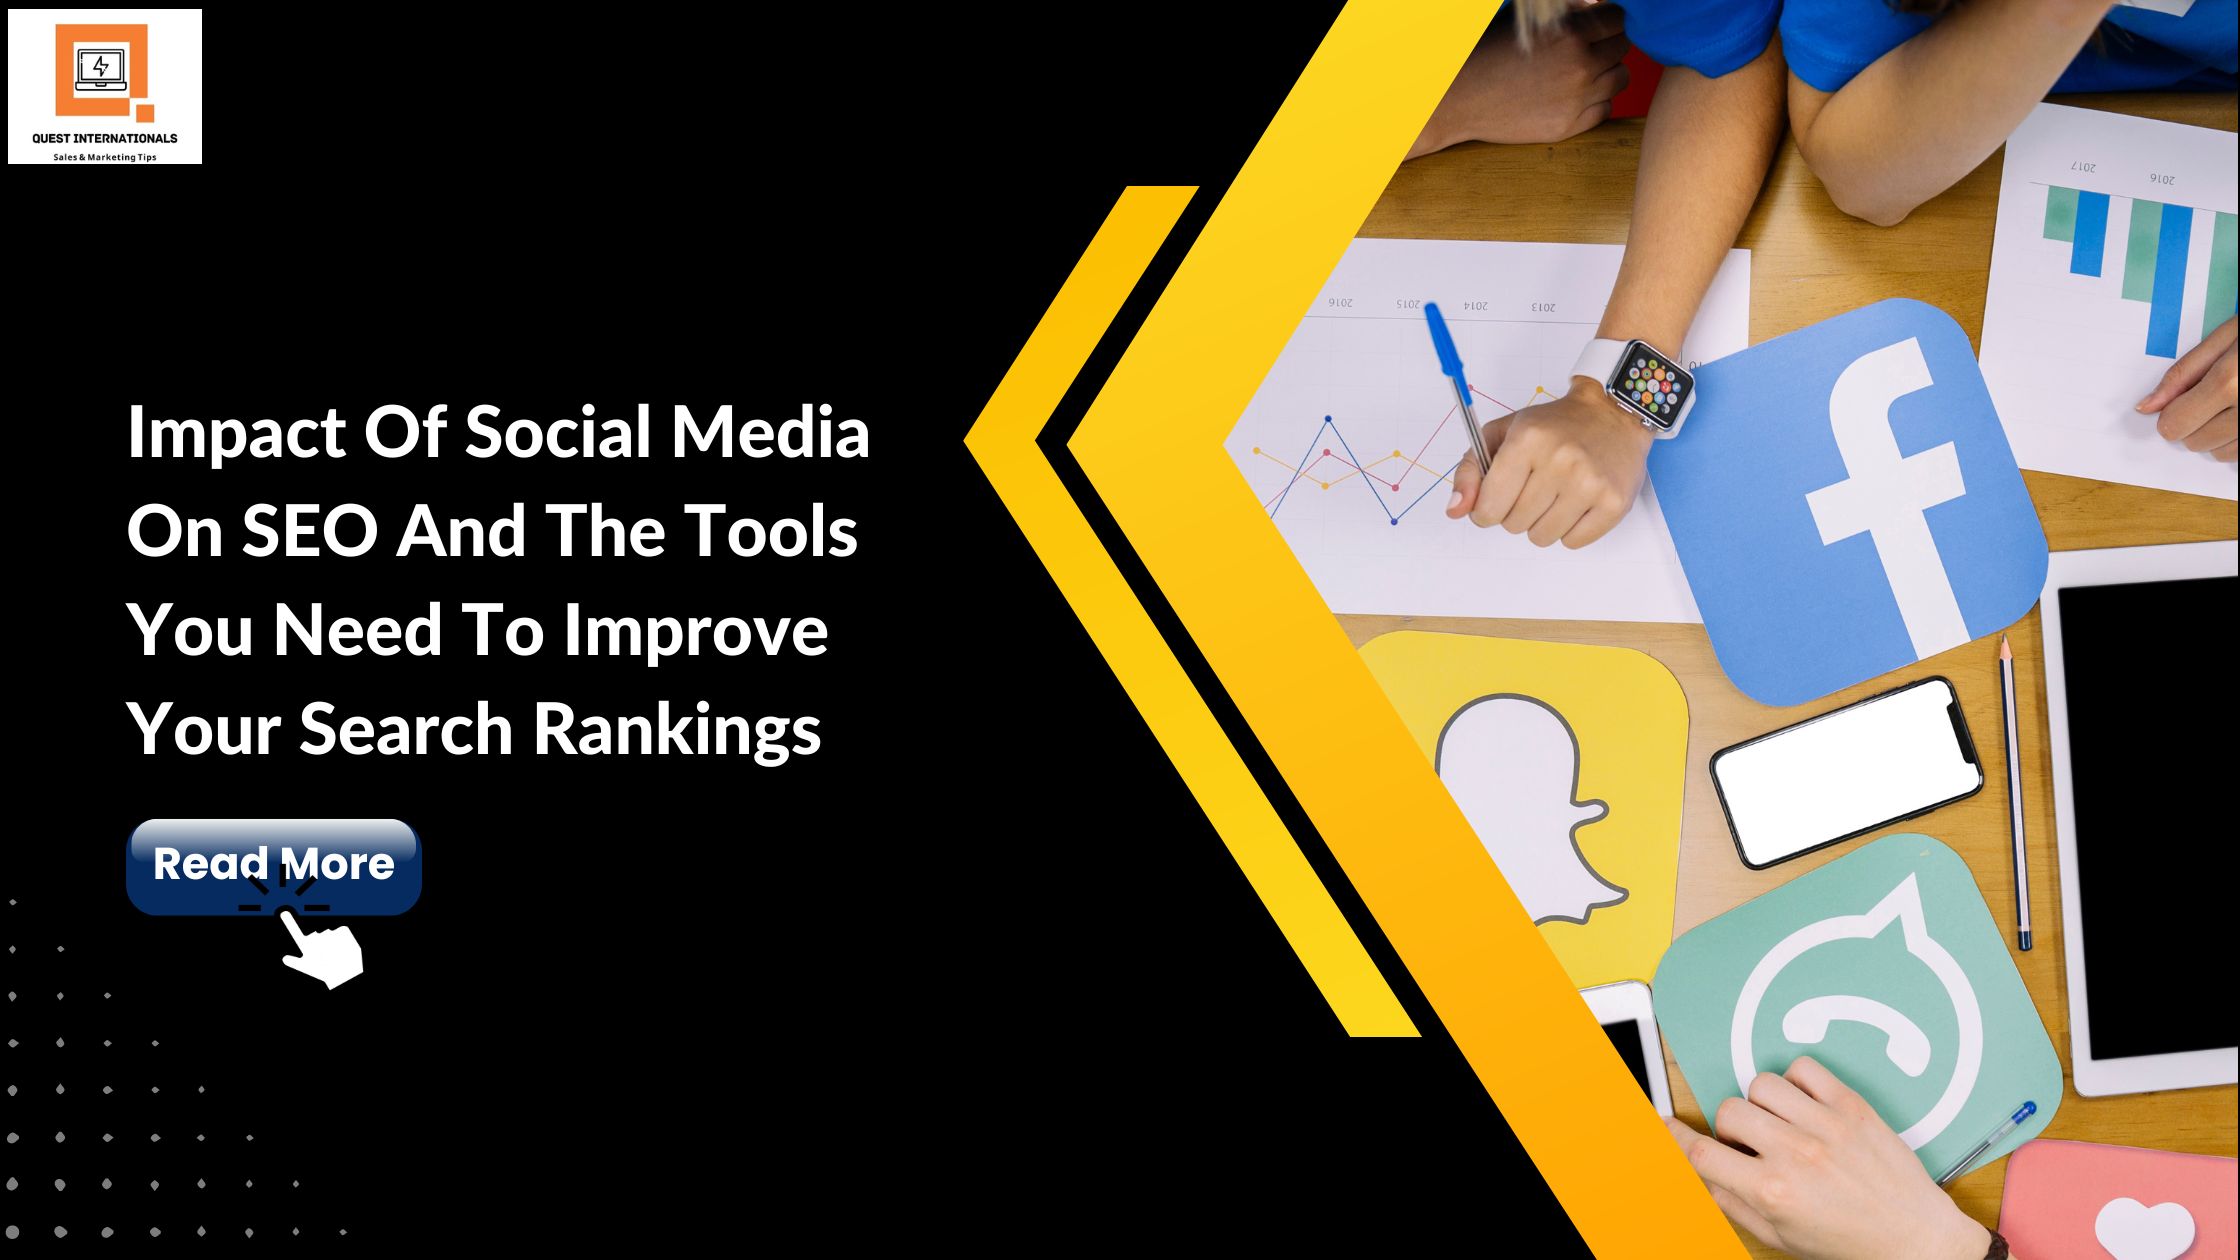 You are currently viewing The Impact Of Social Media On SEO And The Tools You Need To Improve Your Search Rankings